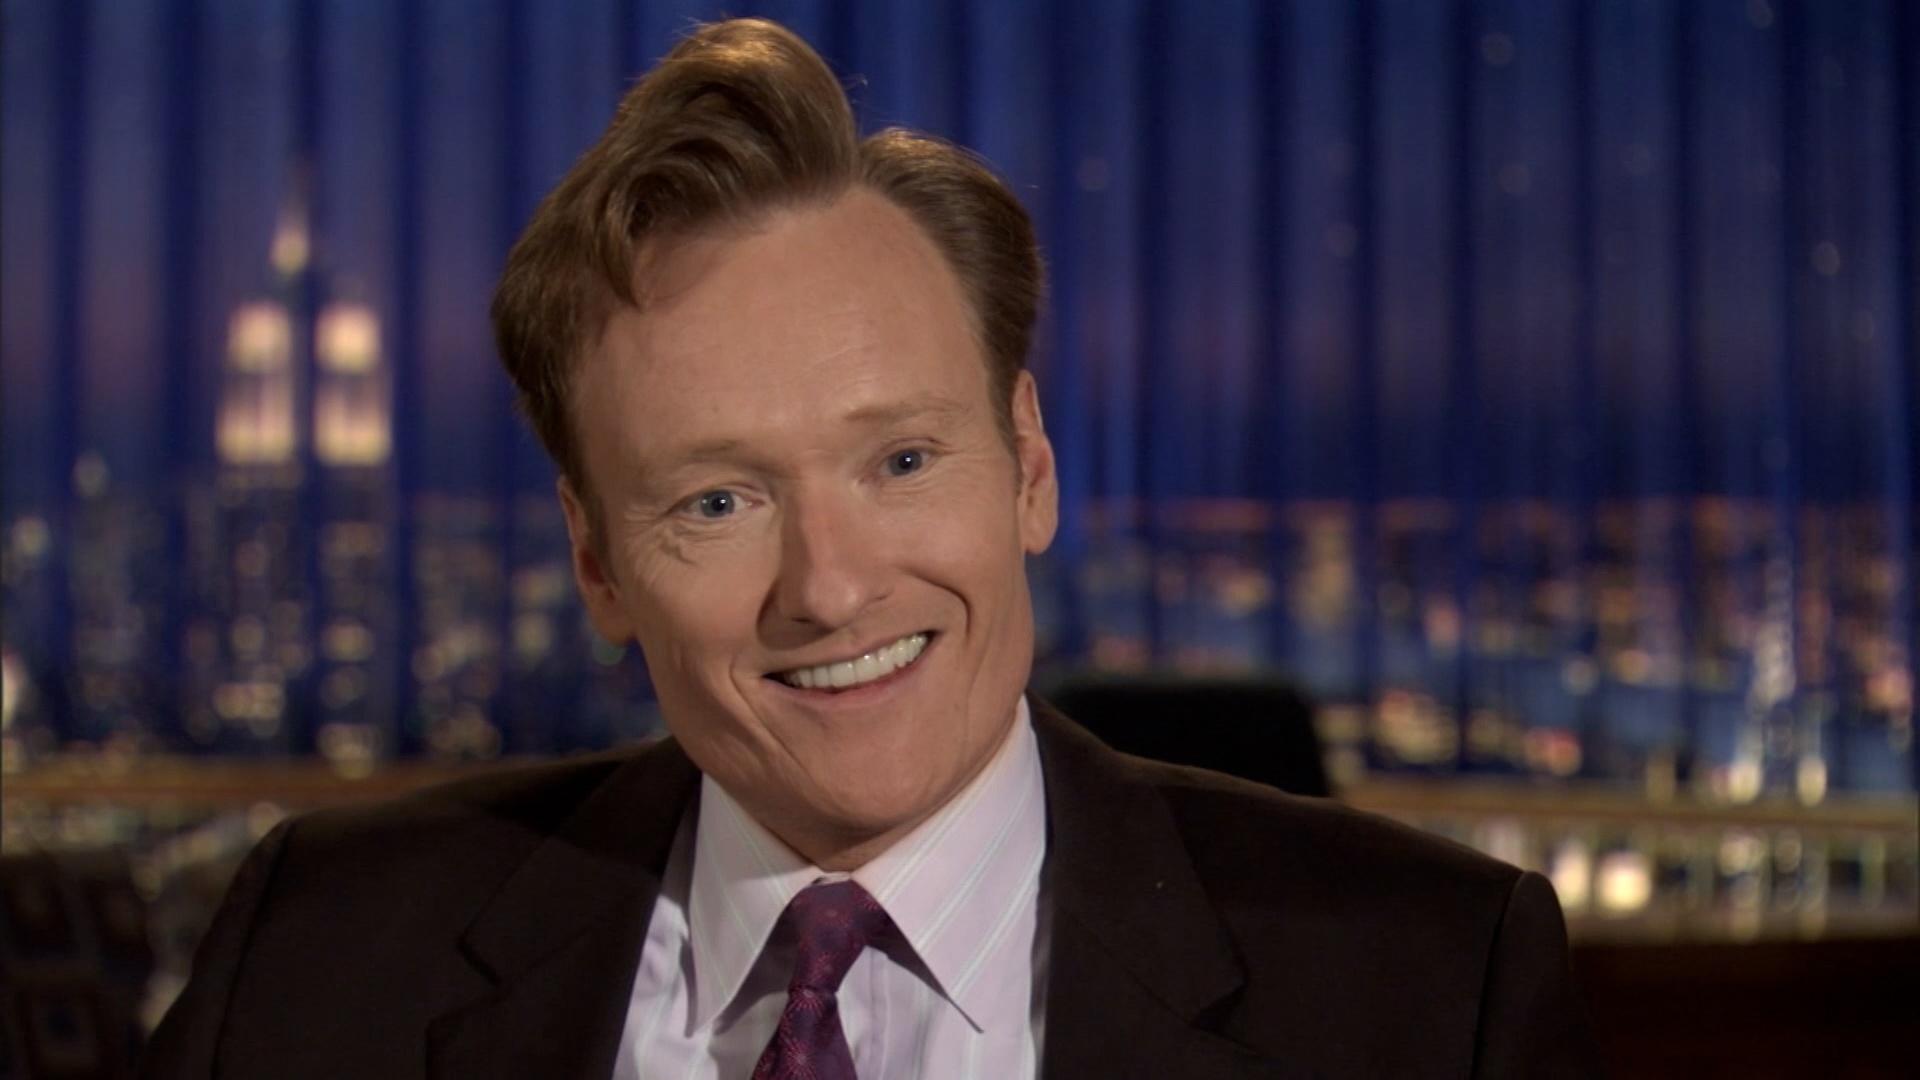 Conan O’Brien gets serious about silliness